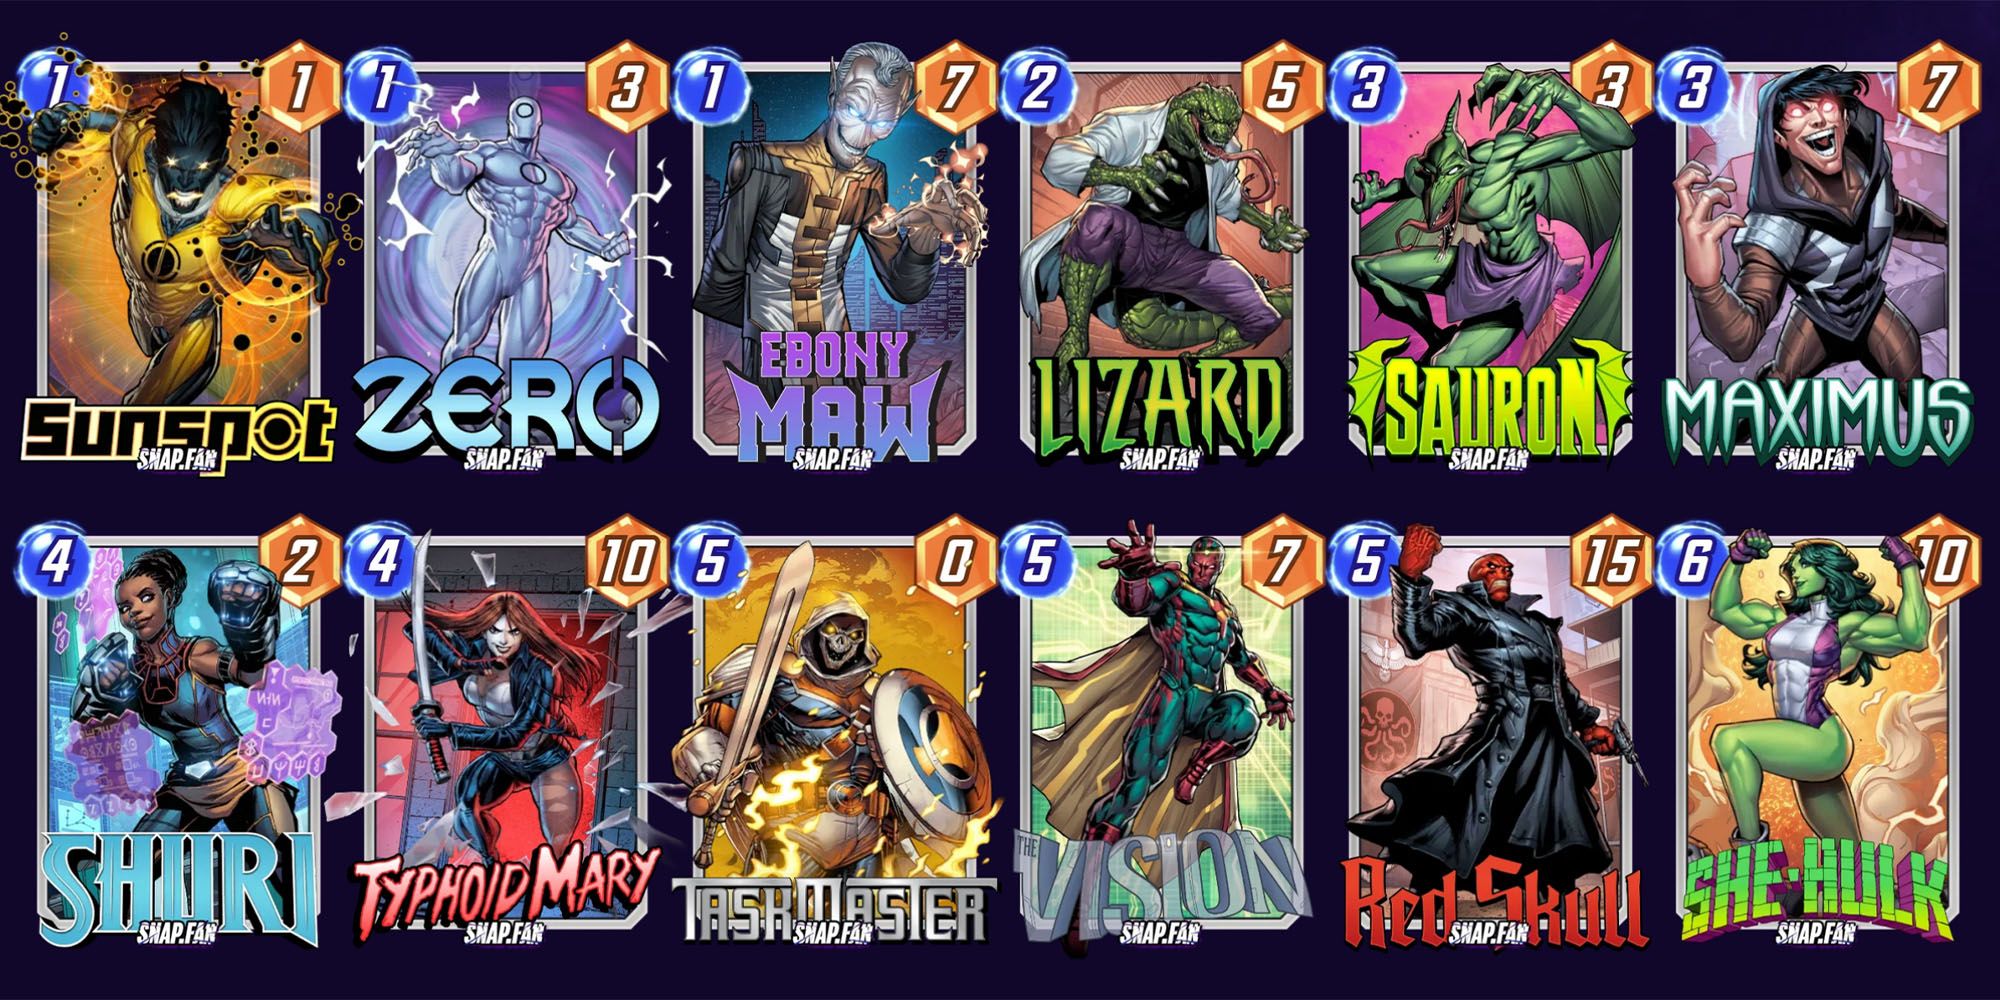 Sauron Marvel SNAP deck with Vision and Shuri